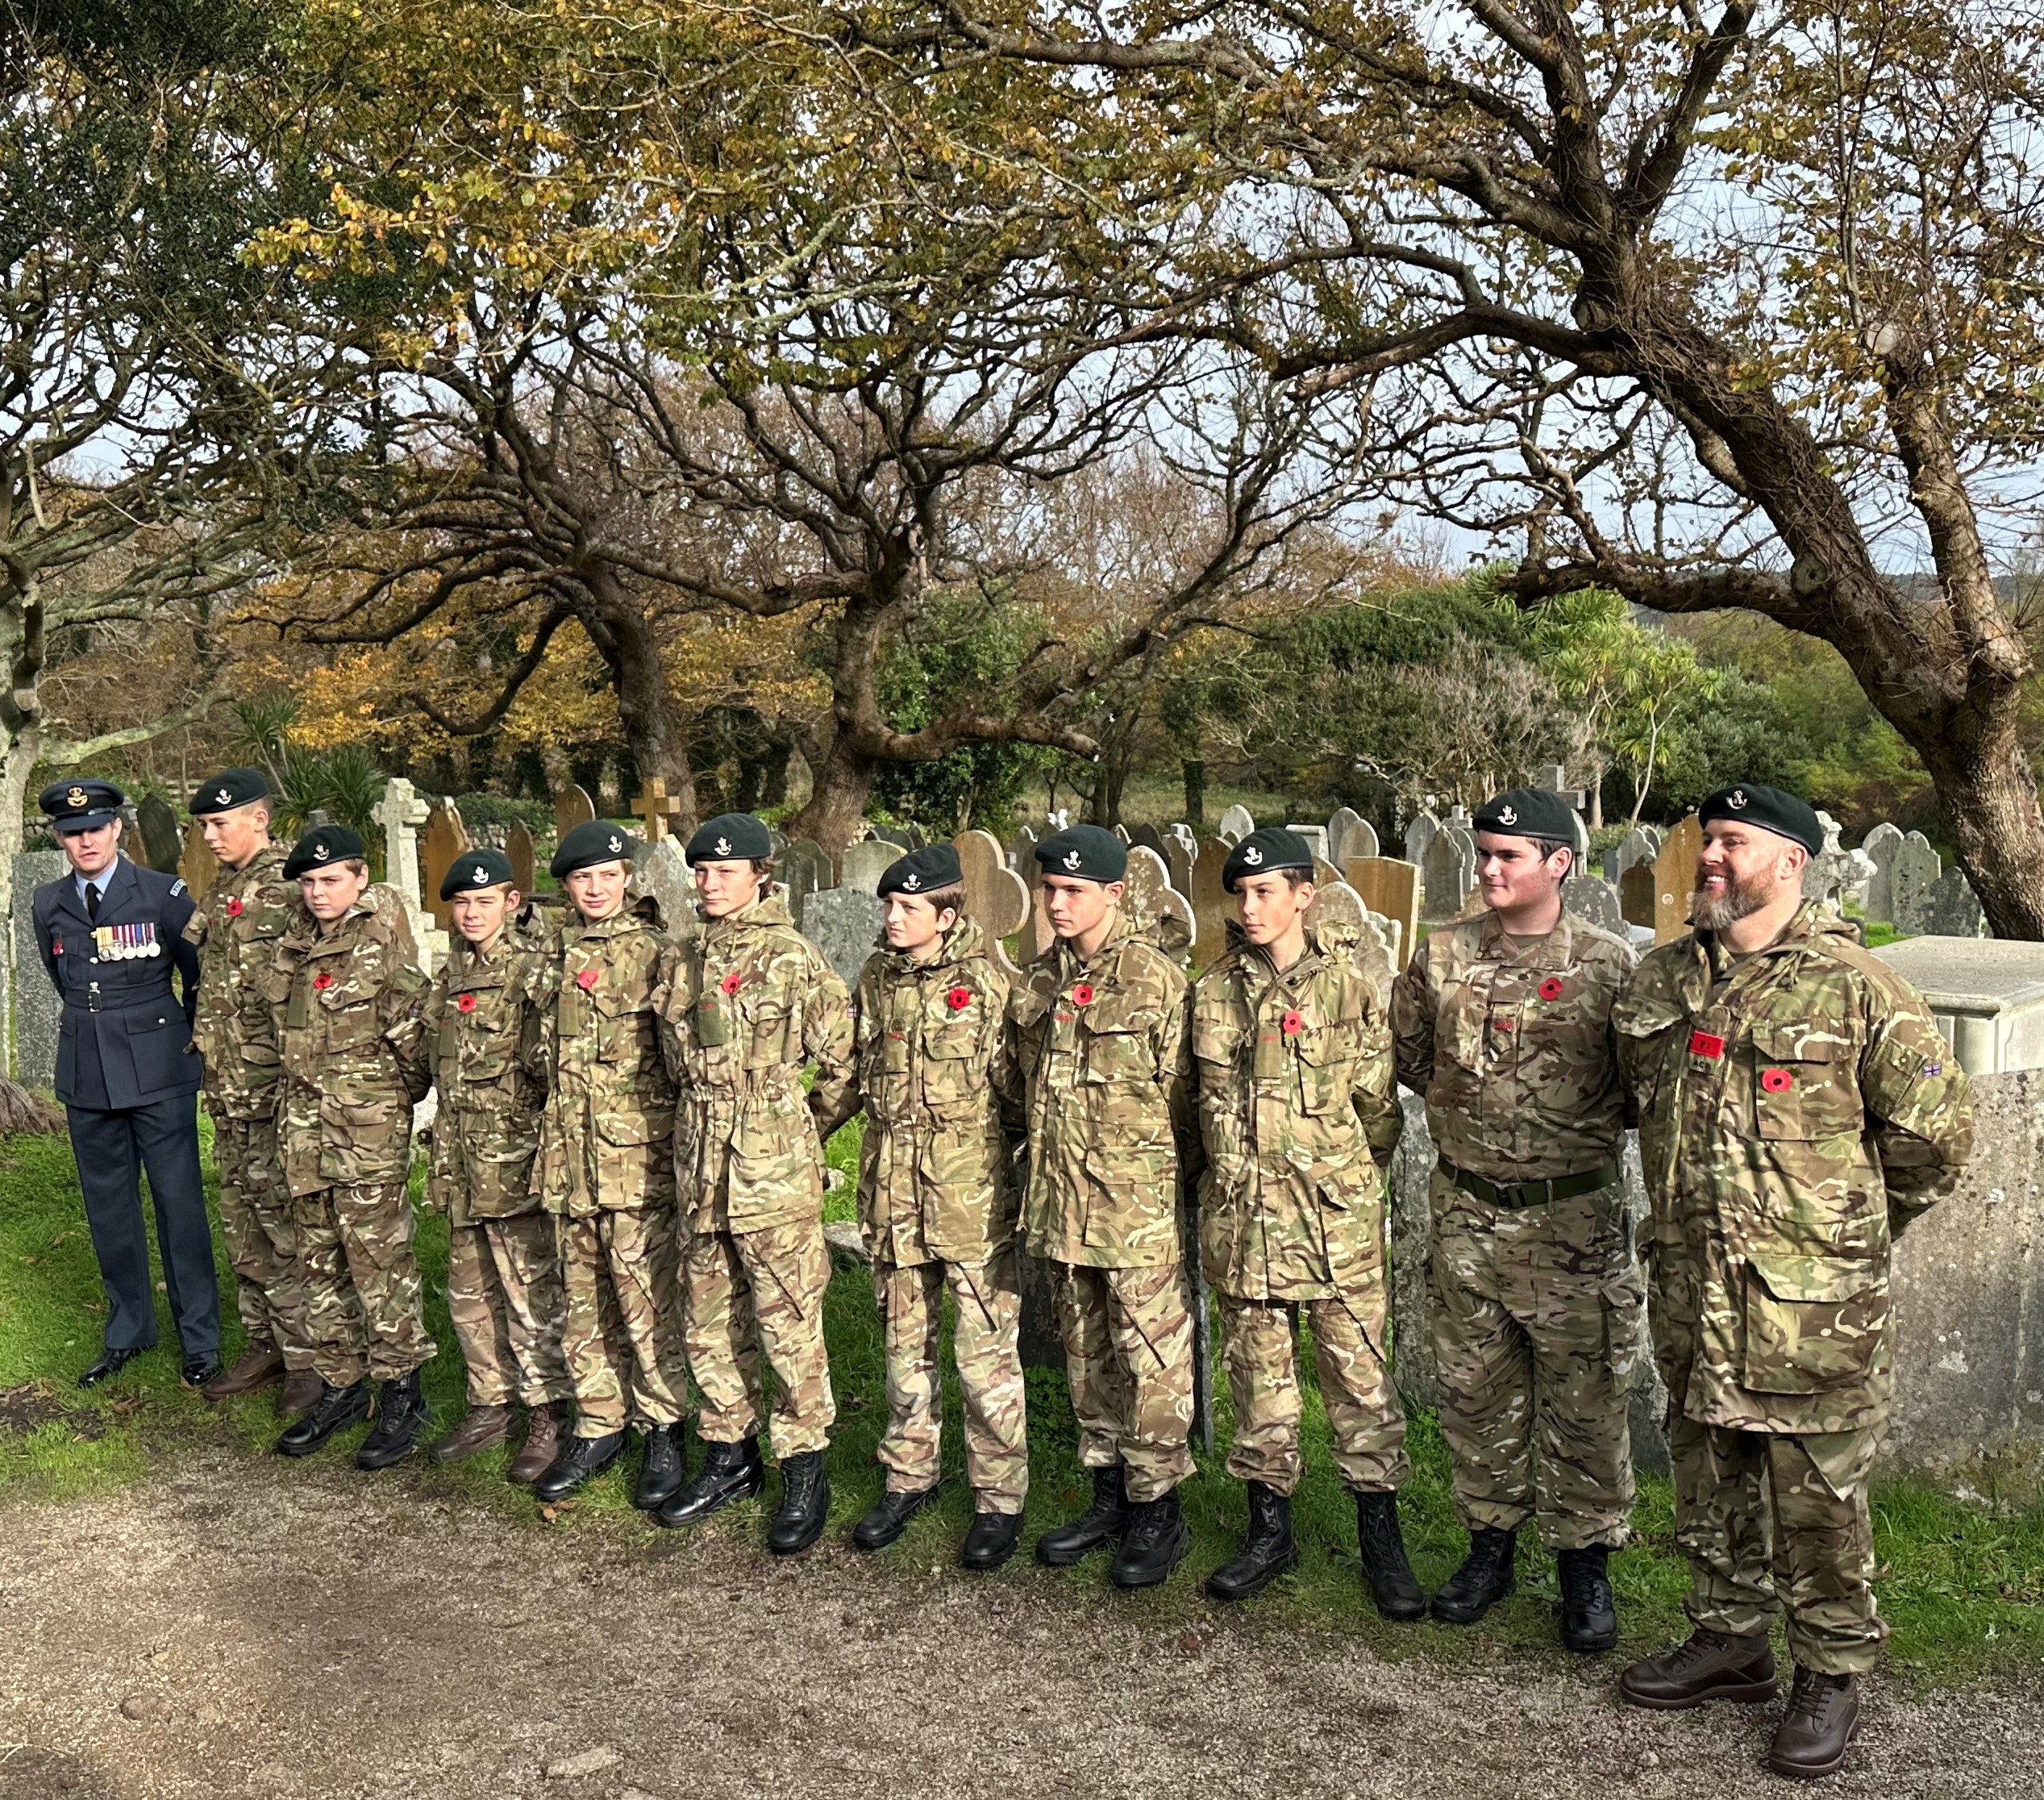 Image of the Army Cadets following the Act of Remembrance service